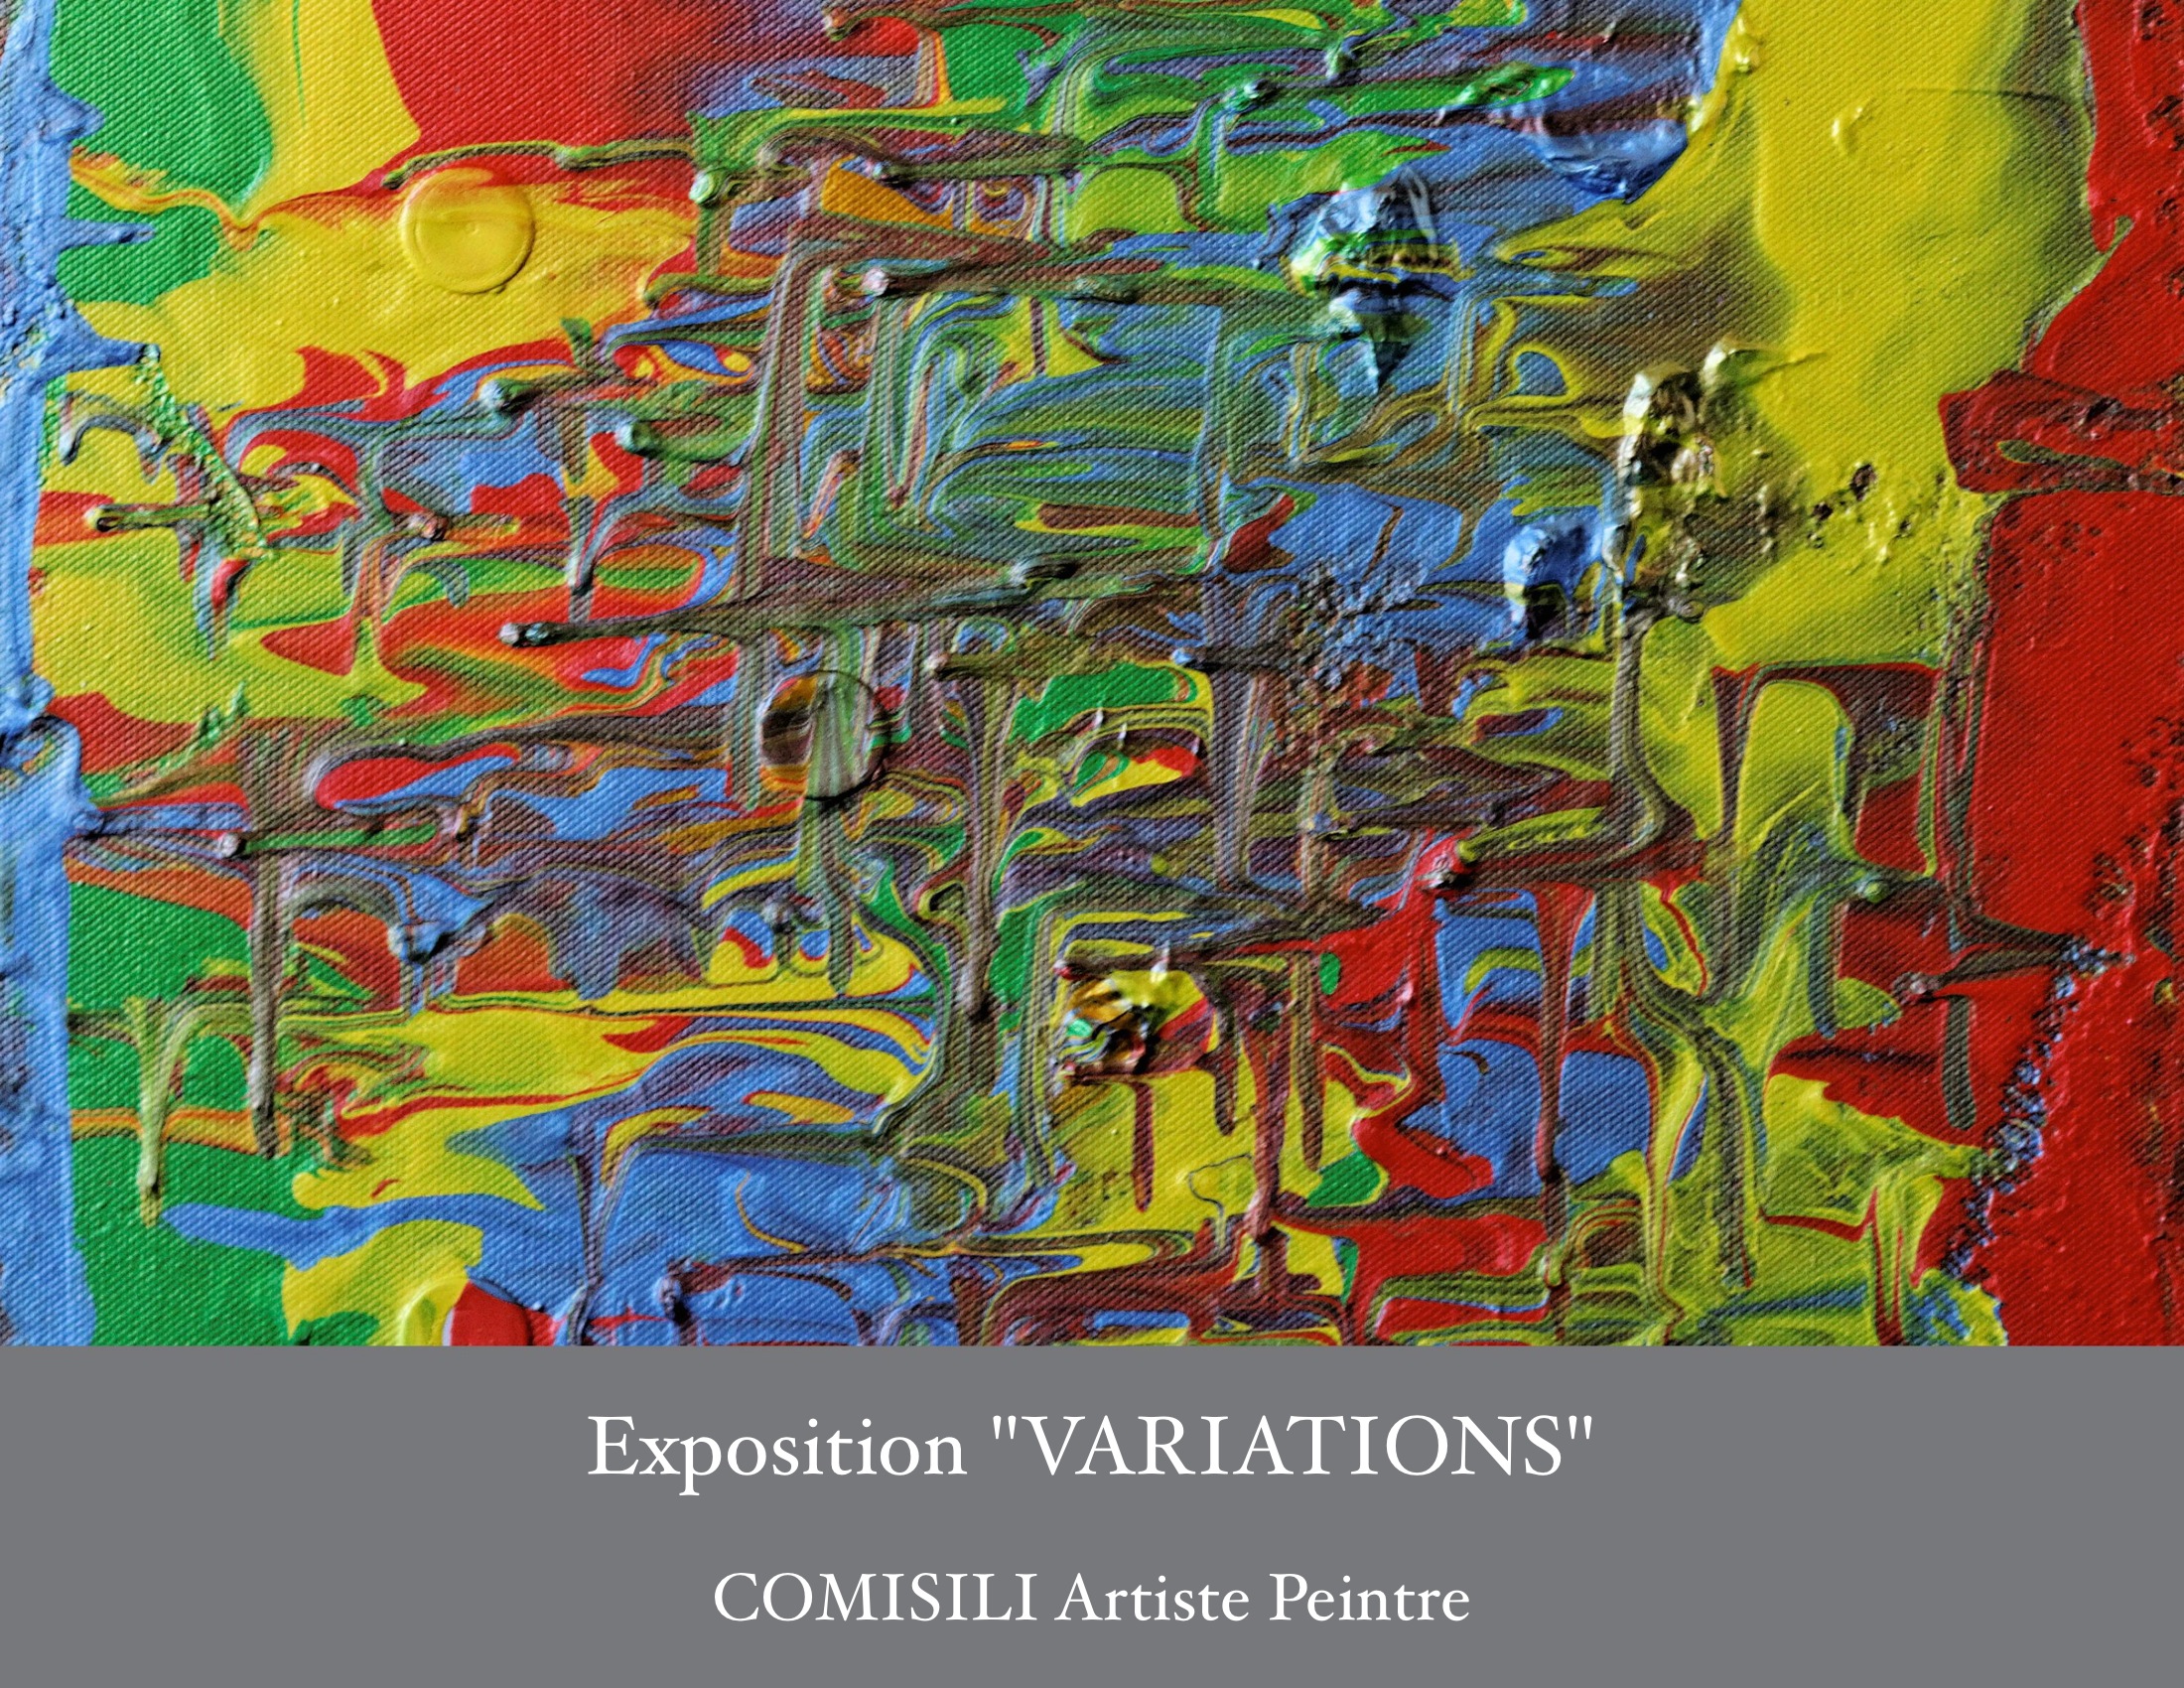 Catalogue Exposition Variations Comisili